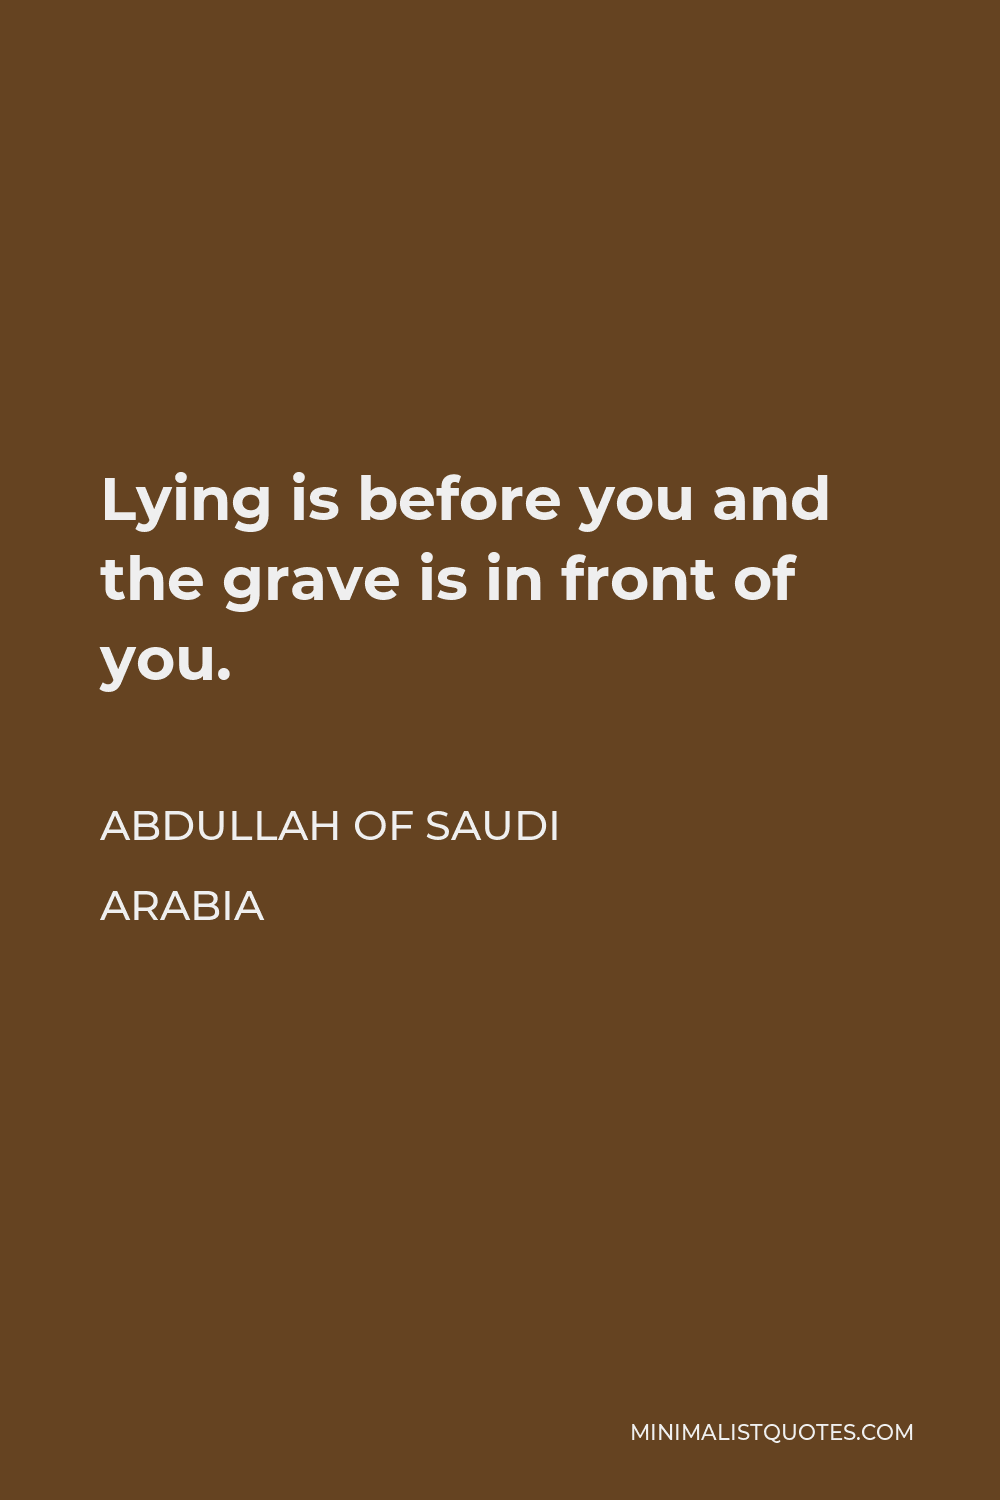 Abdullah of Saudi Arabia Quote - Lying is before you and the grave is in front of you.